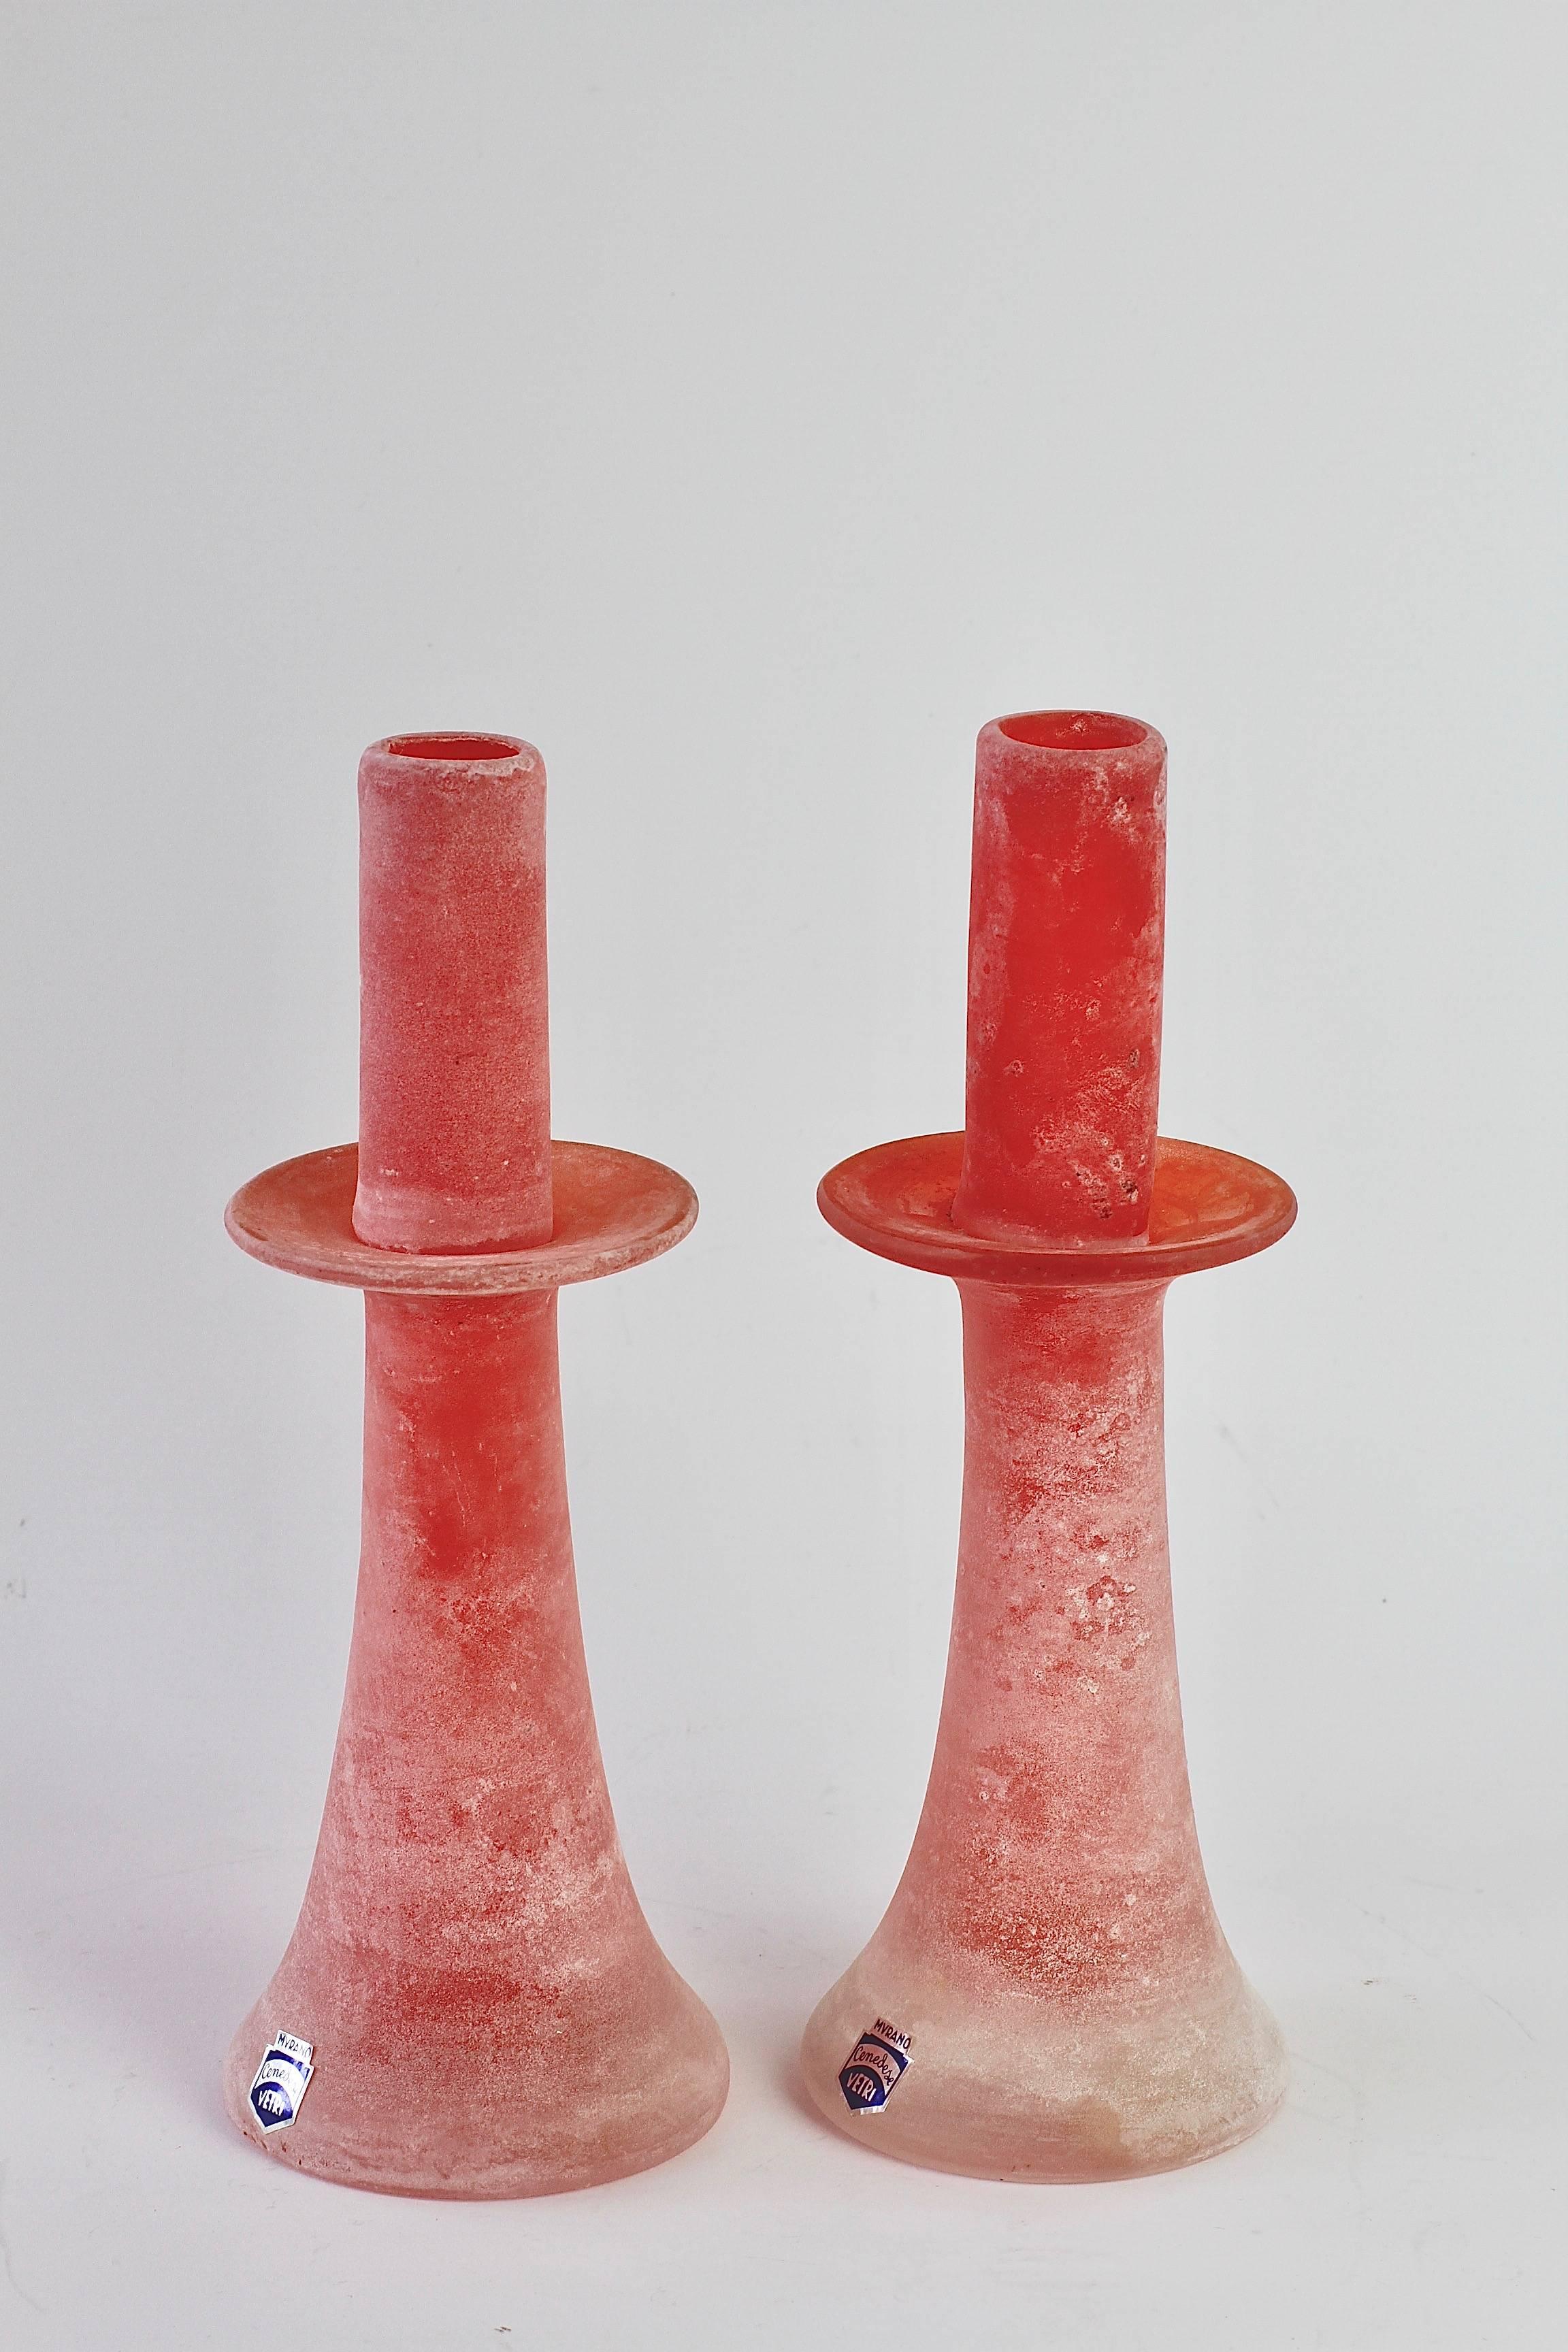 Beautiful and rare signed pair of Scavo glass candlestick holders by Cenedese Vetri Murano glass in collector's condition. Made of red Murano art glass featuring the 'scavo' technique, giving the glass the resemblance of historic roman glass which